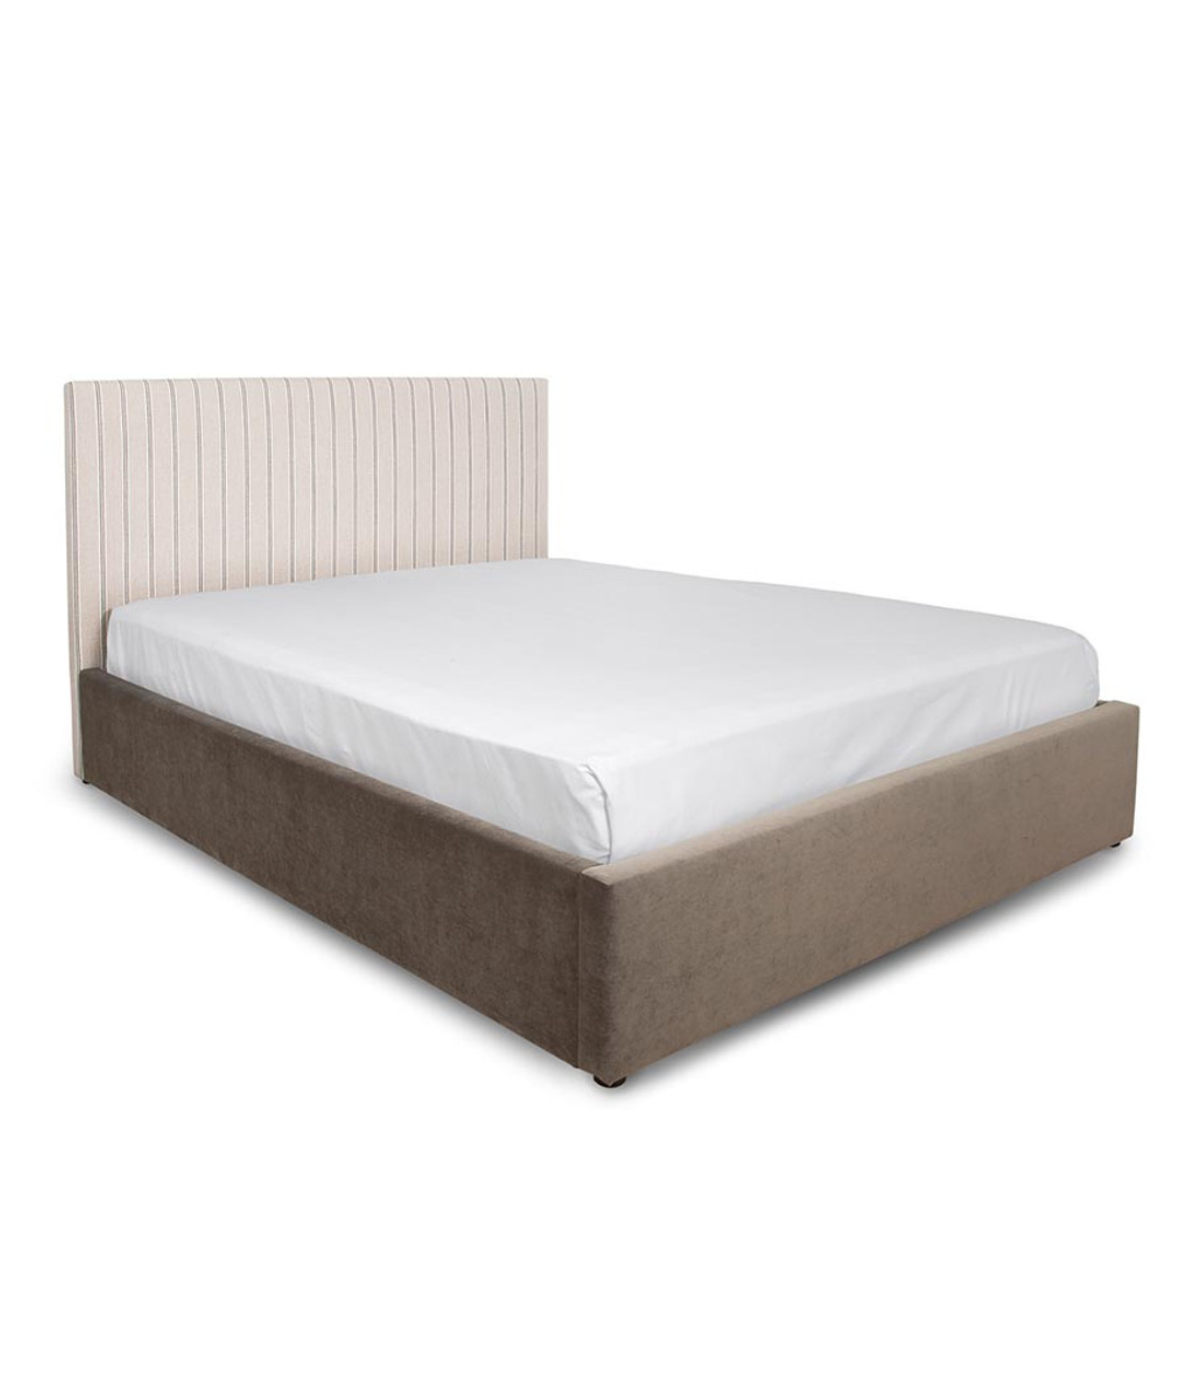 Cove Bed